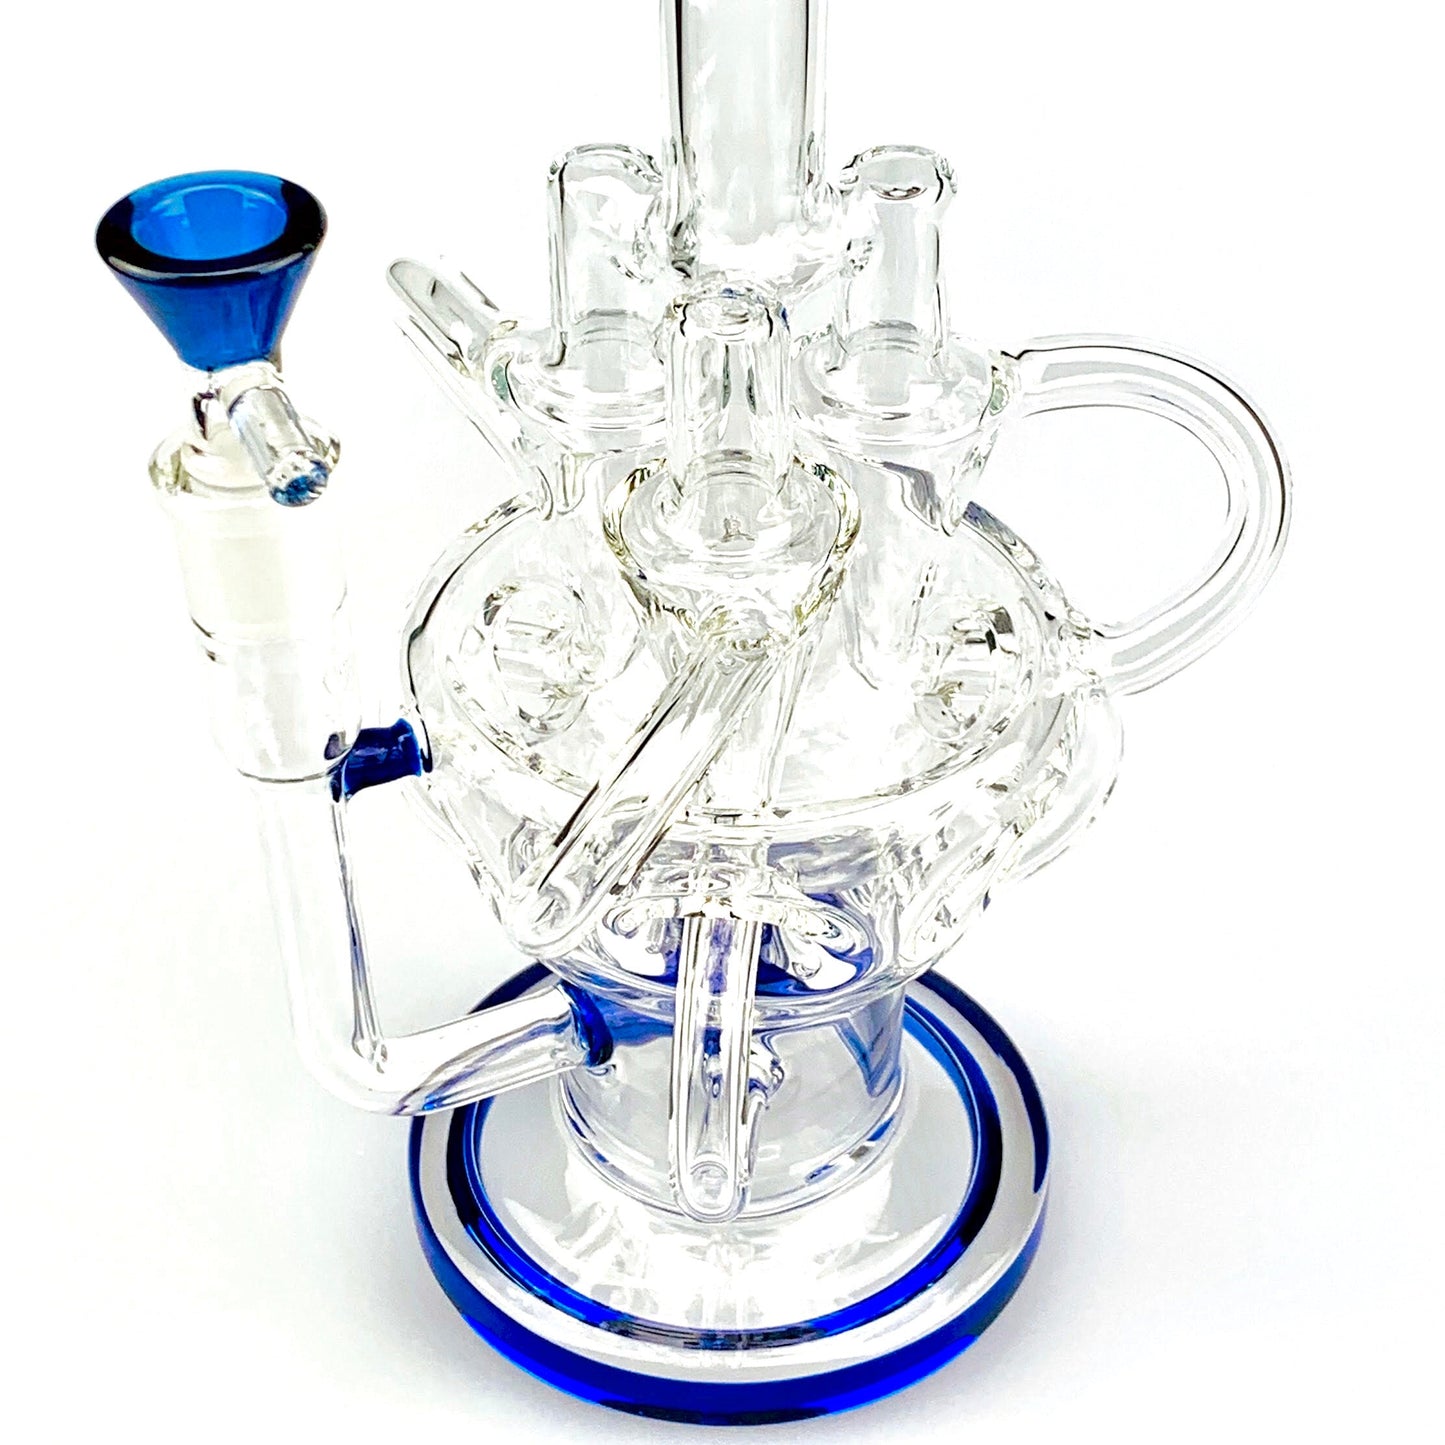 CaliConnected 10” Triple Recycler Bong 